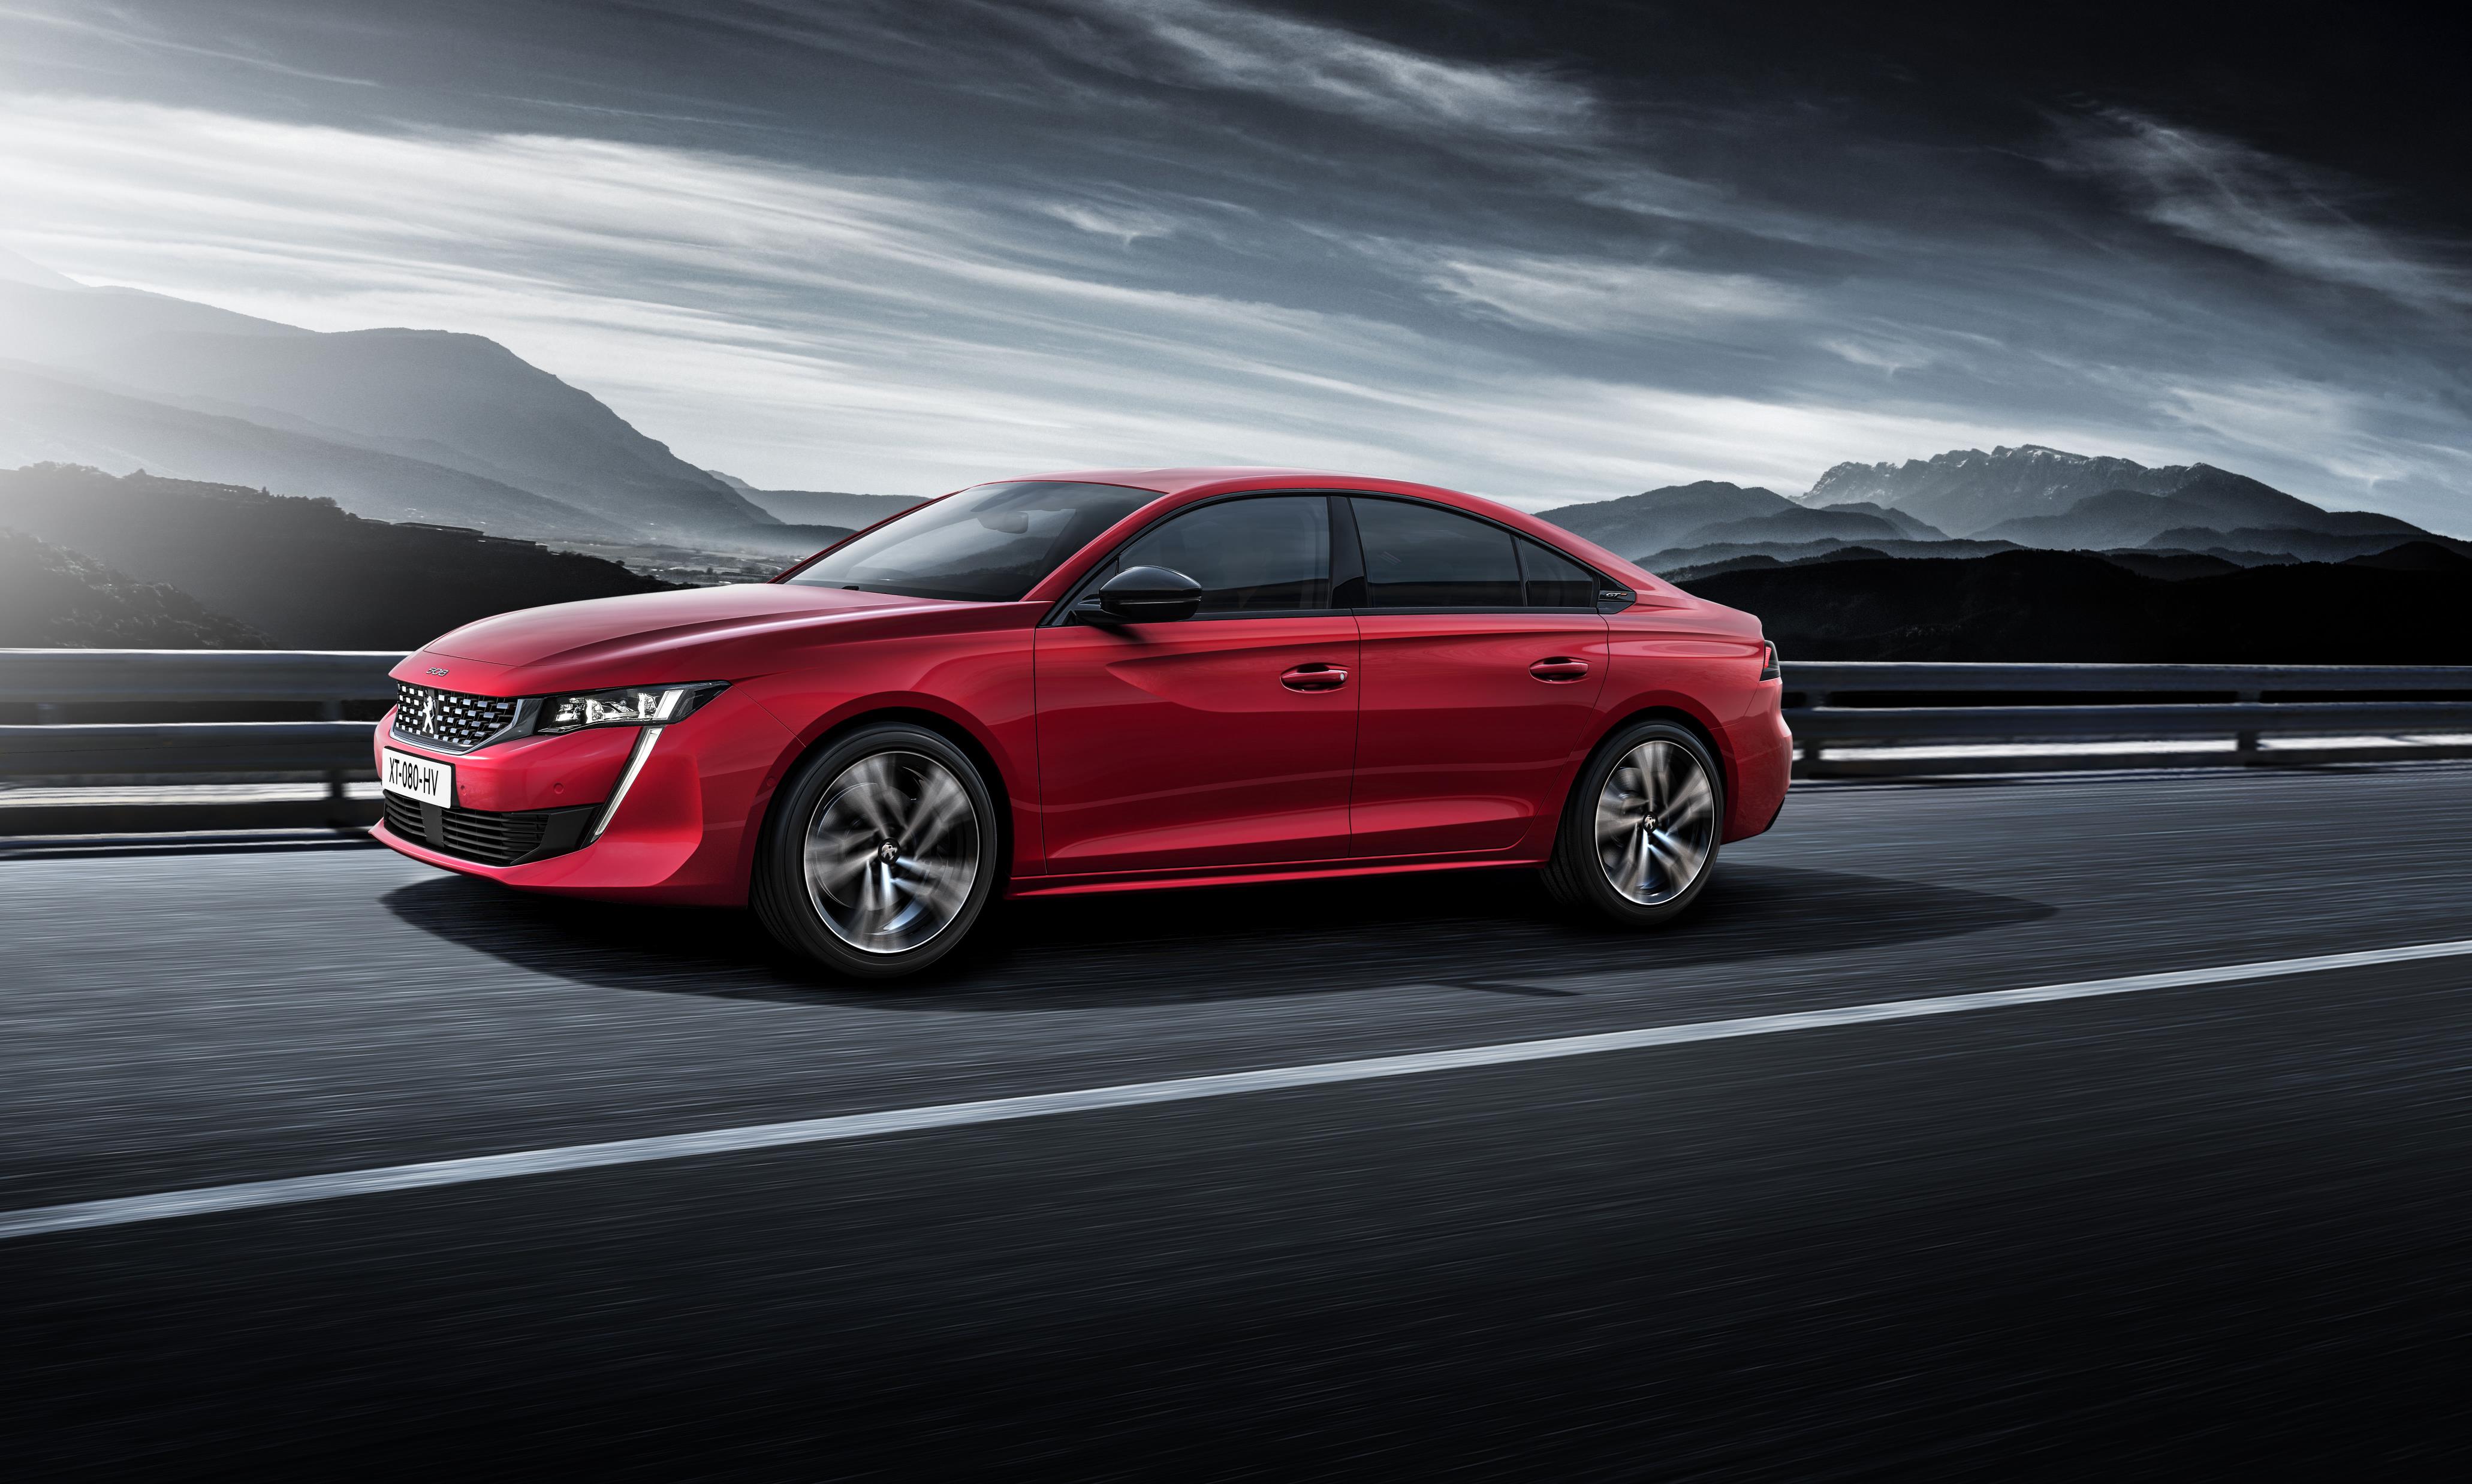 Red Peugeot 508 with dramatic backdrop